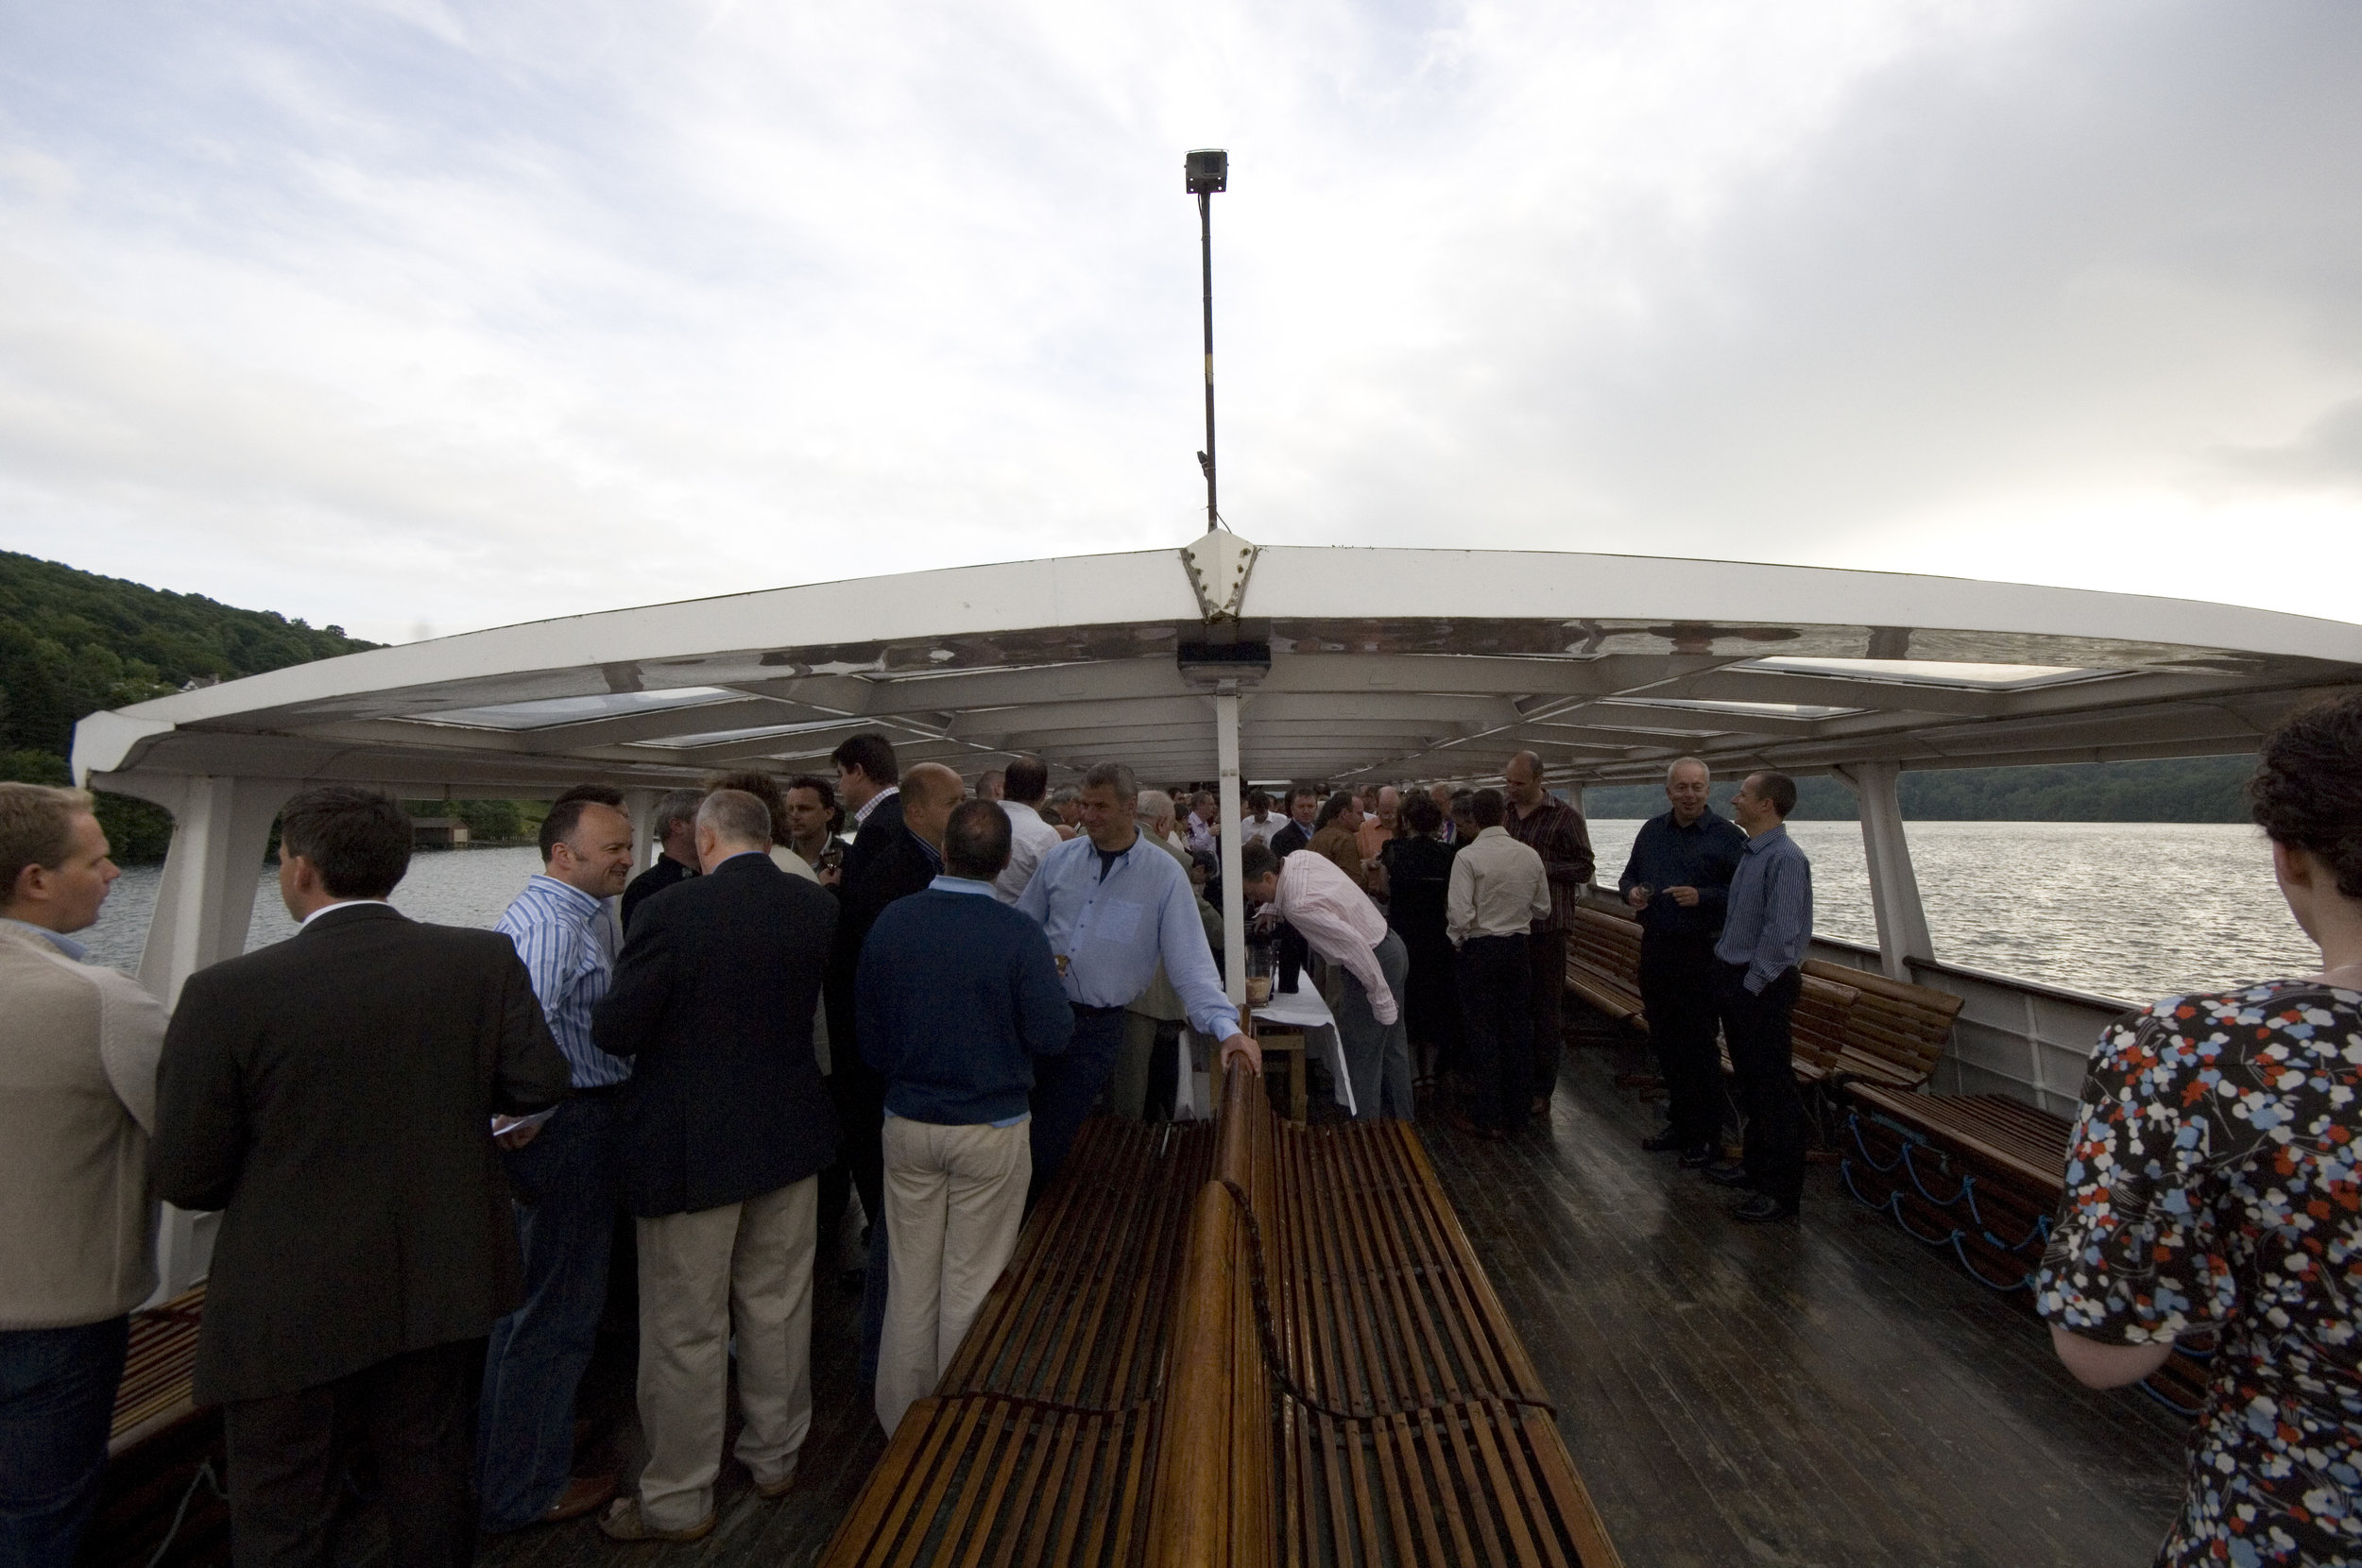 Dwf confrence lakes on boat.jpg